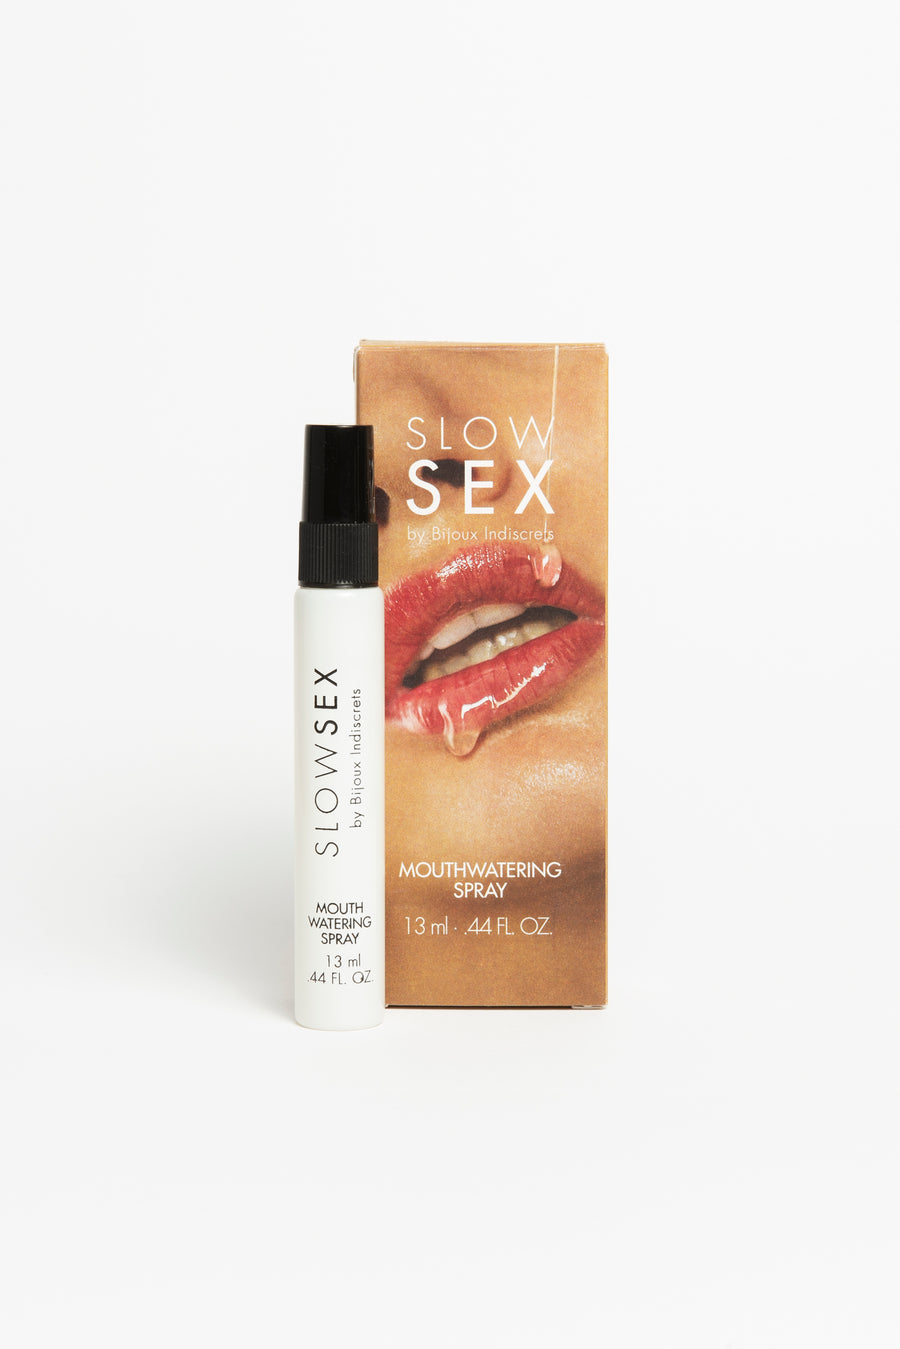 SLOW SEX MOUTHWATERING SPRAY